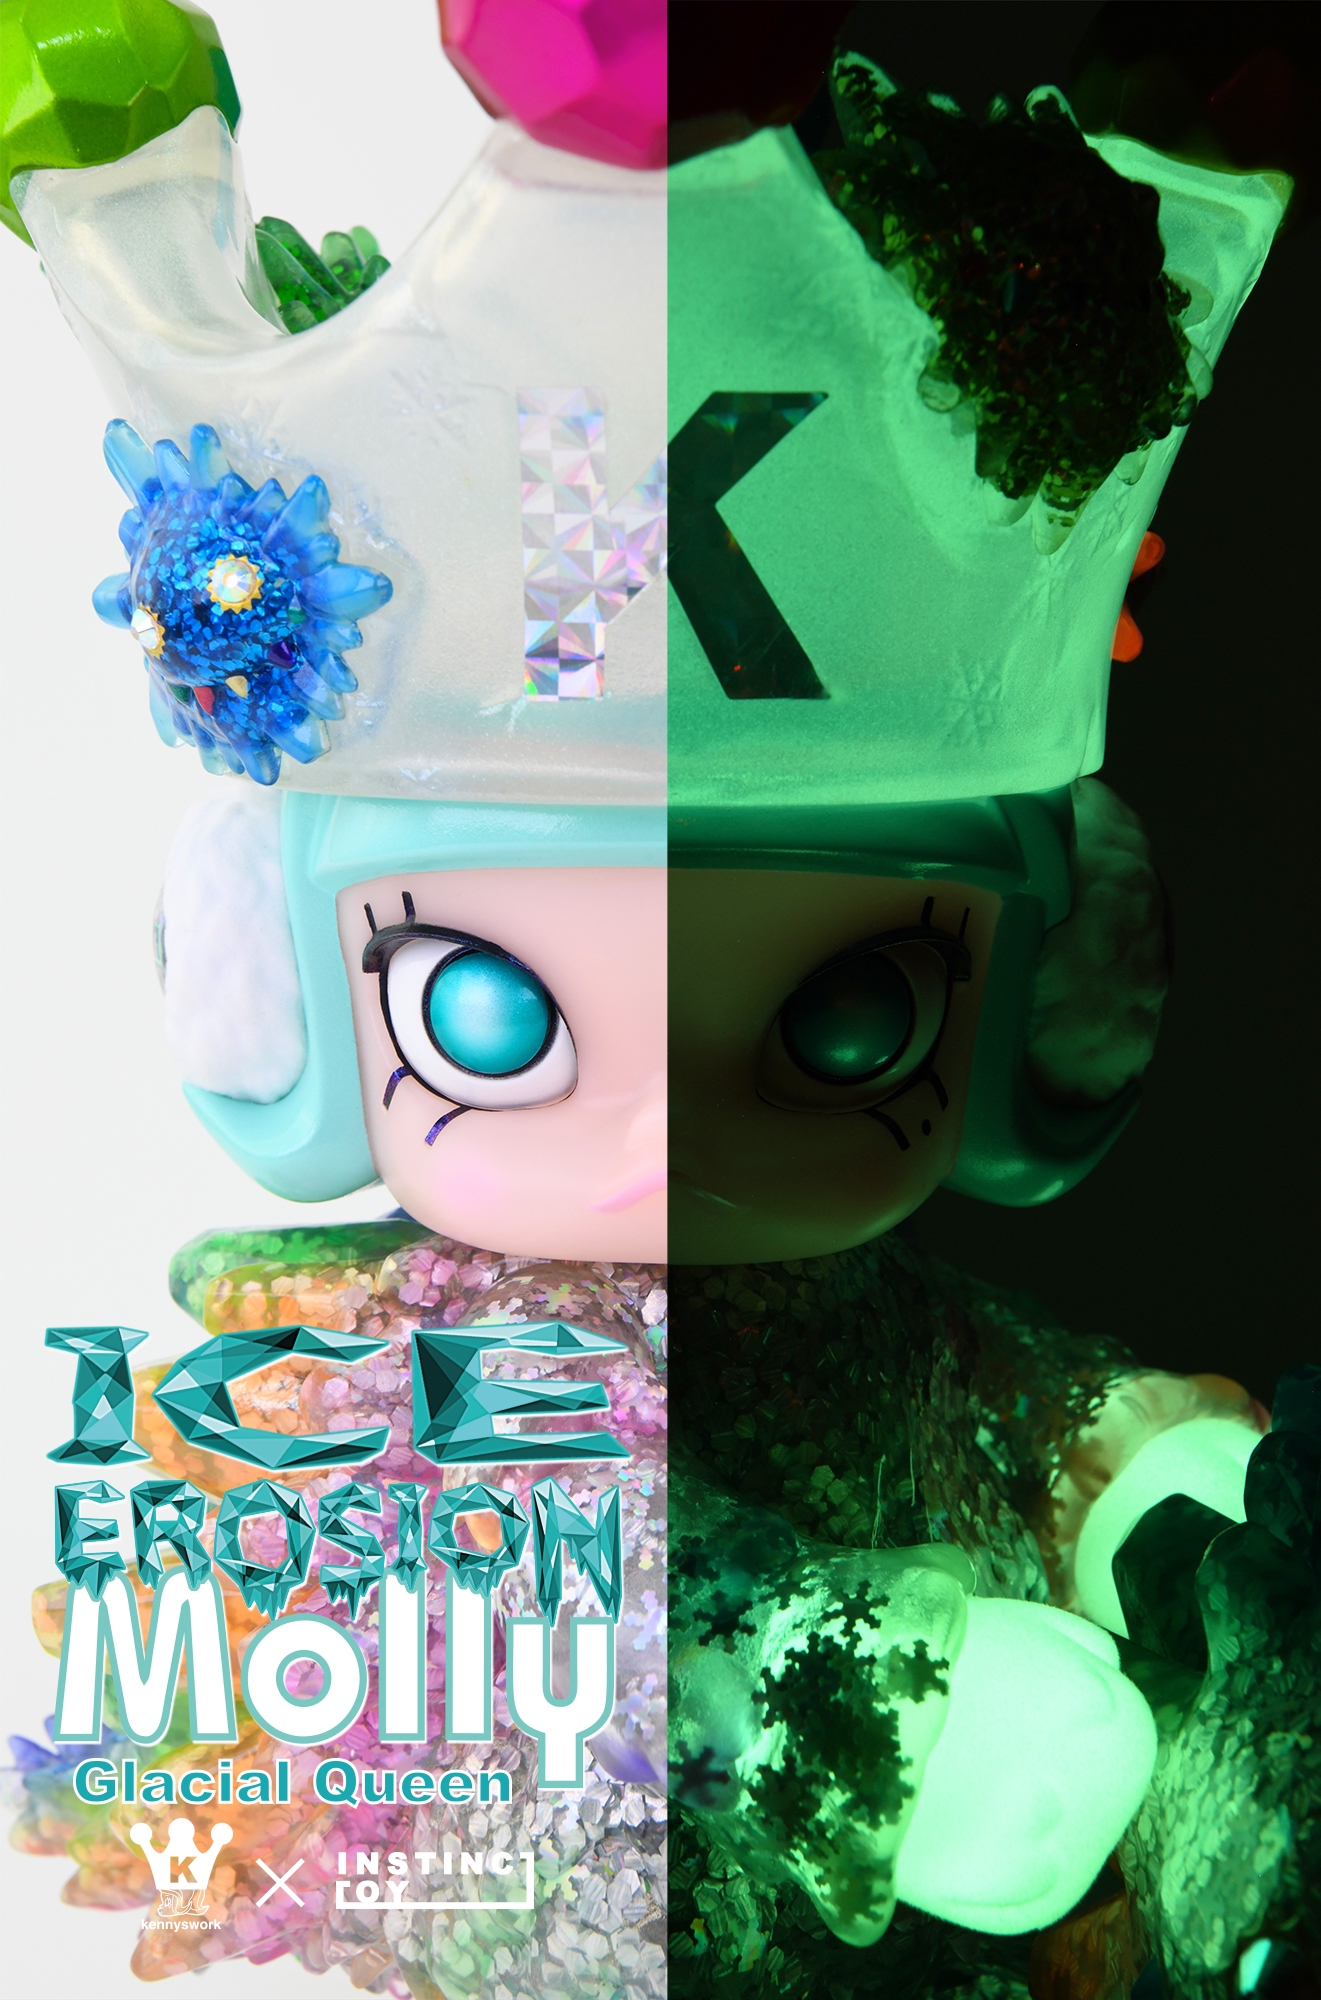 ICE EROSION MOLLY 3rd 「Glacial Queen」在庫少ないため早い者勝ち